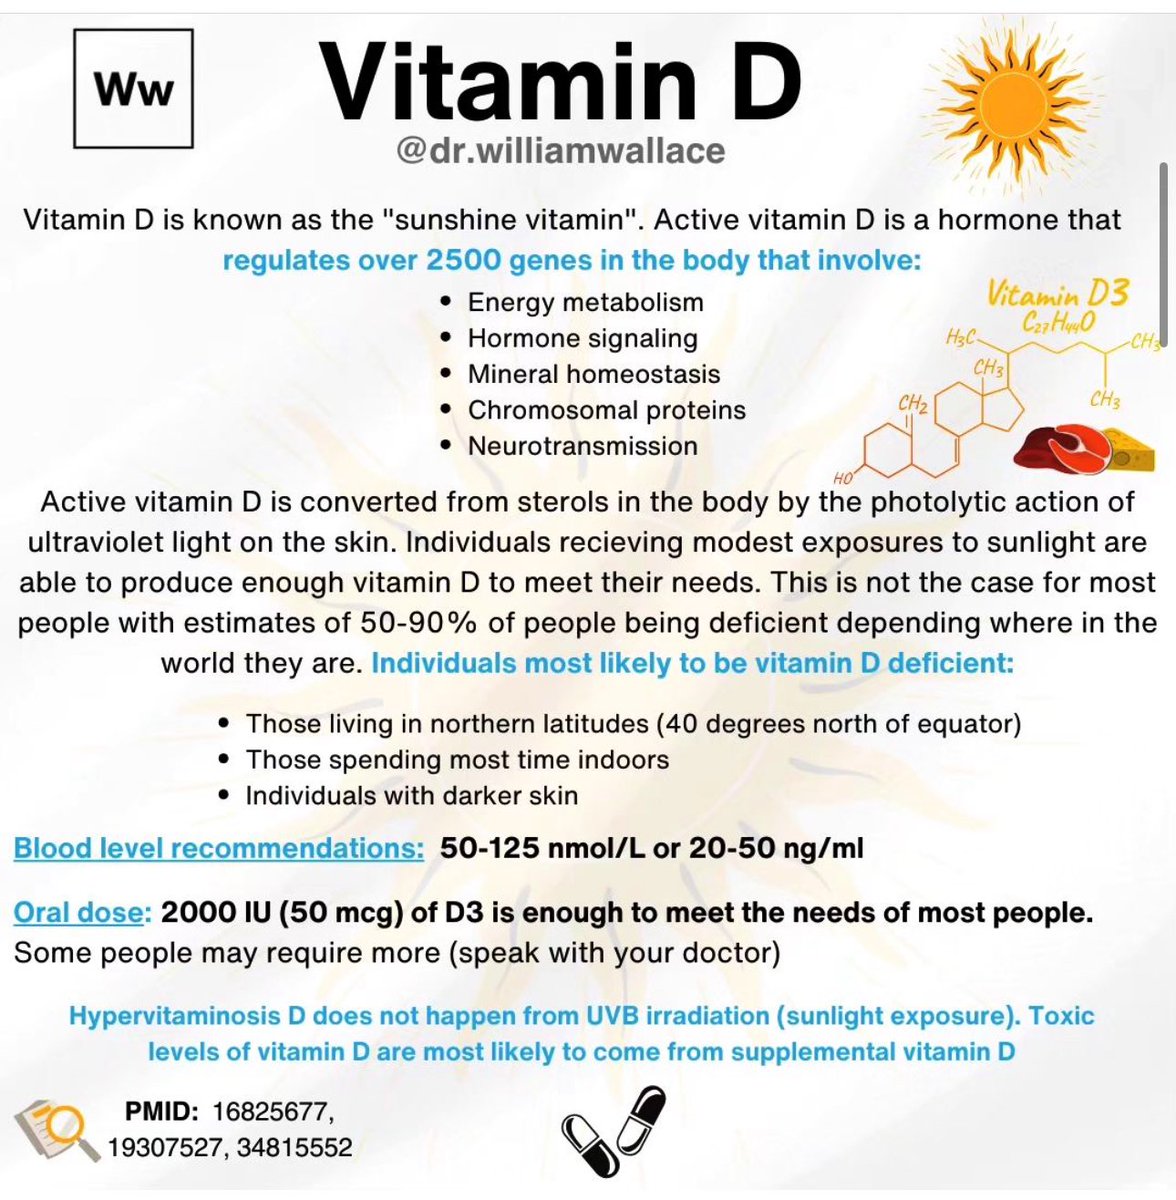 ☀️Vitamin D: What you need to know #MedEd #VitaminD H/T @drwilliamwallac